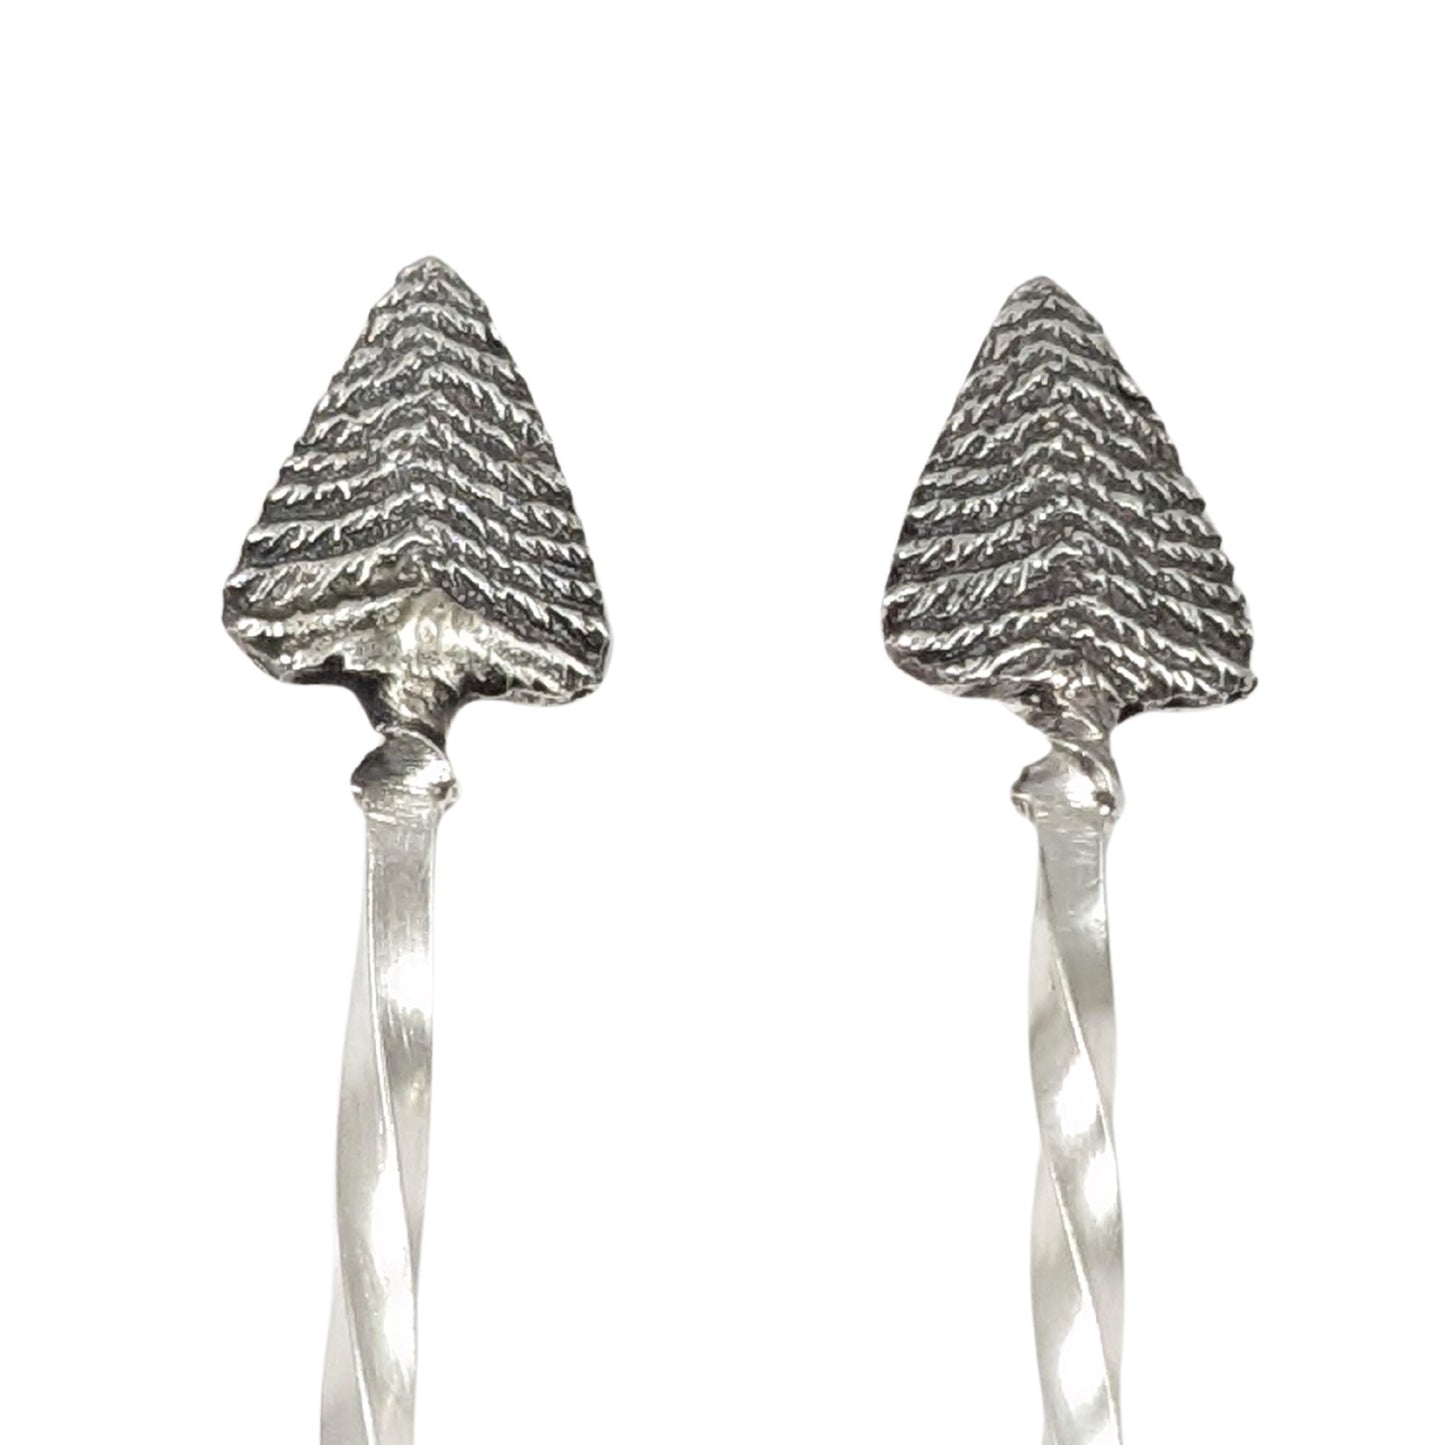 Pair of sterling silver cocktail picks. Evergreen trees set on a twisted silver wire.